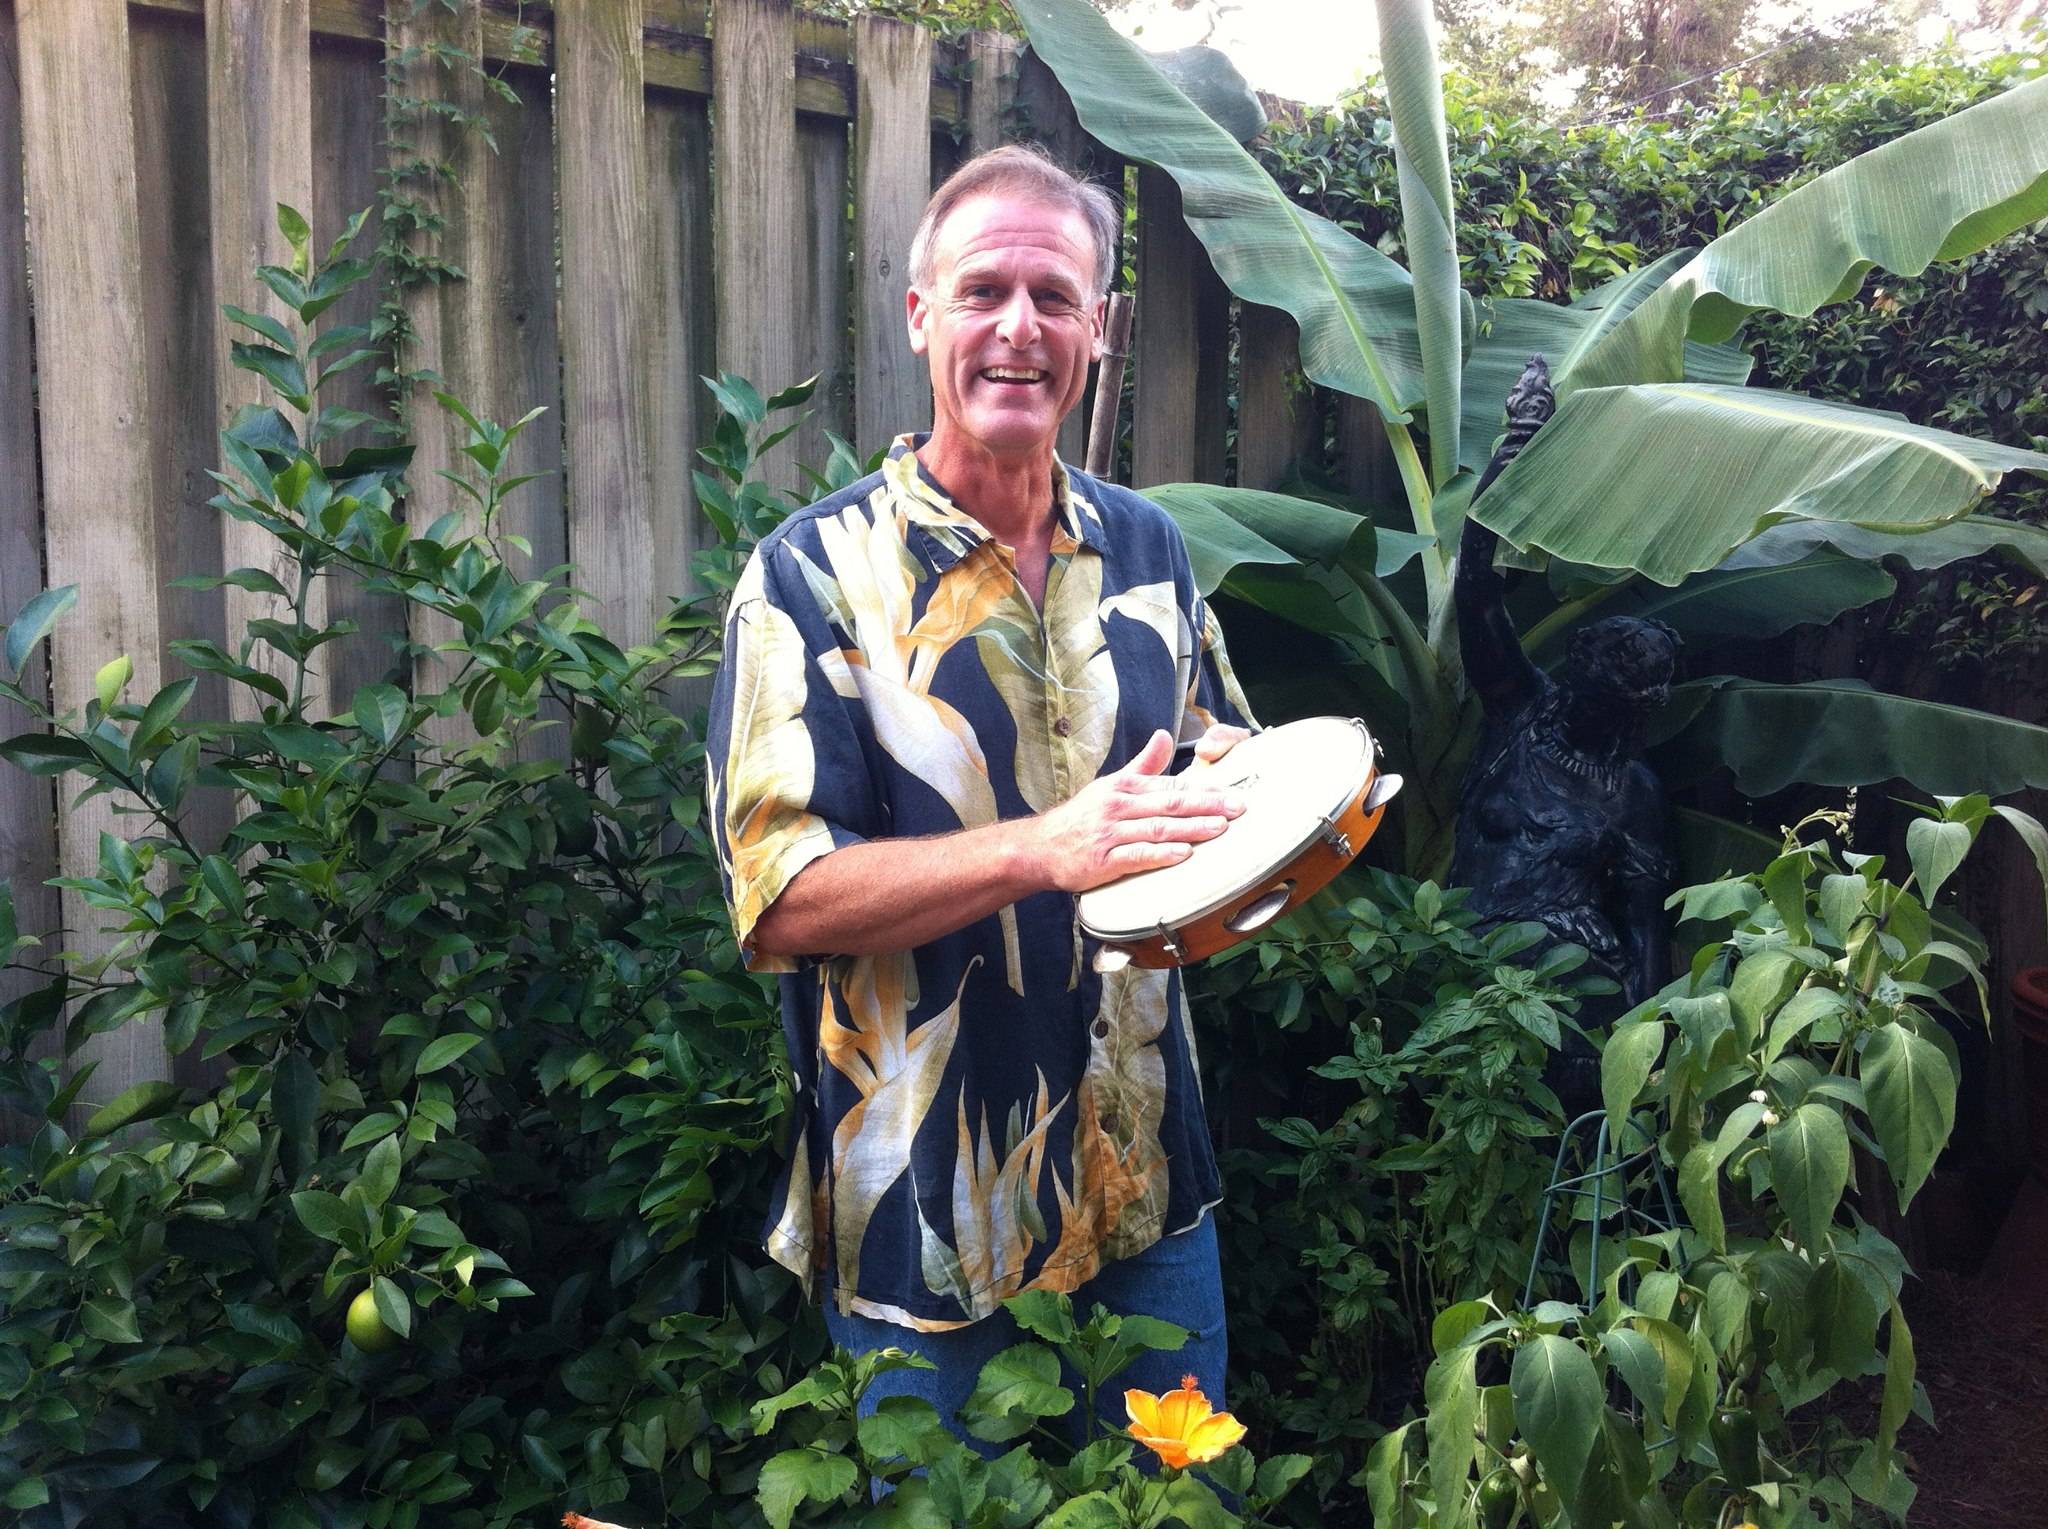 Andrew Hartzell outdoors, smiling and holding a pandeiro